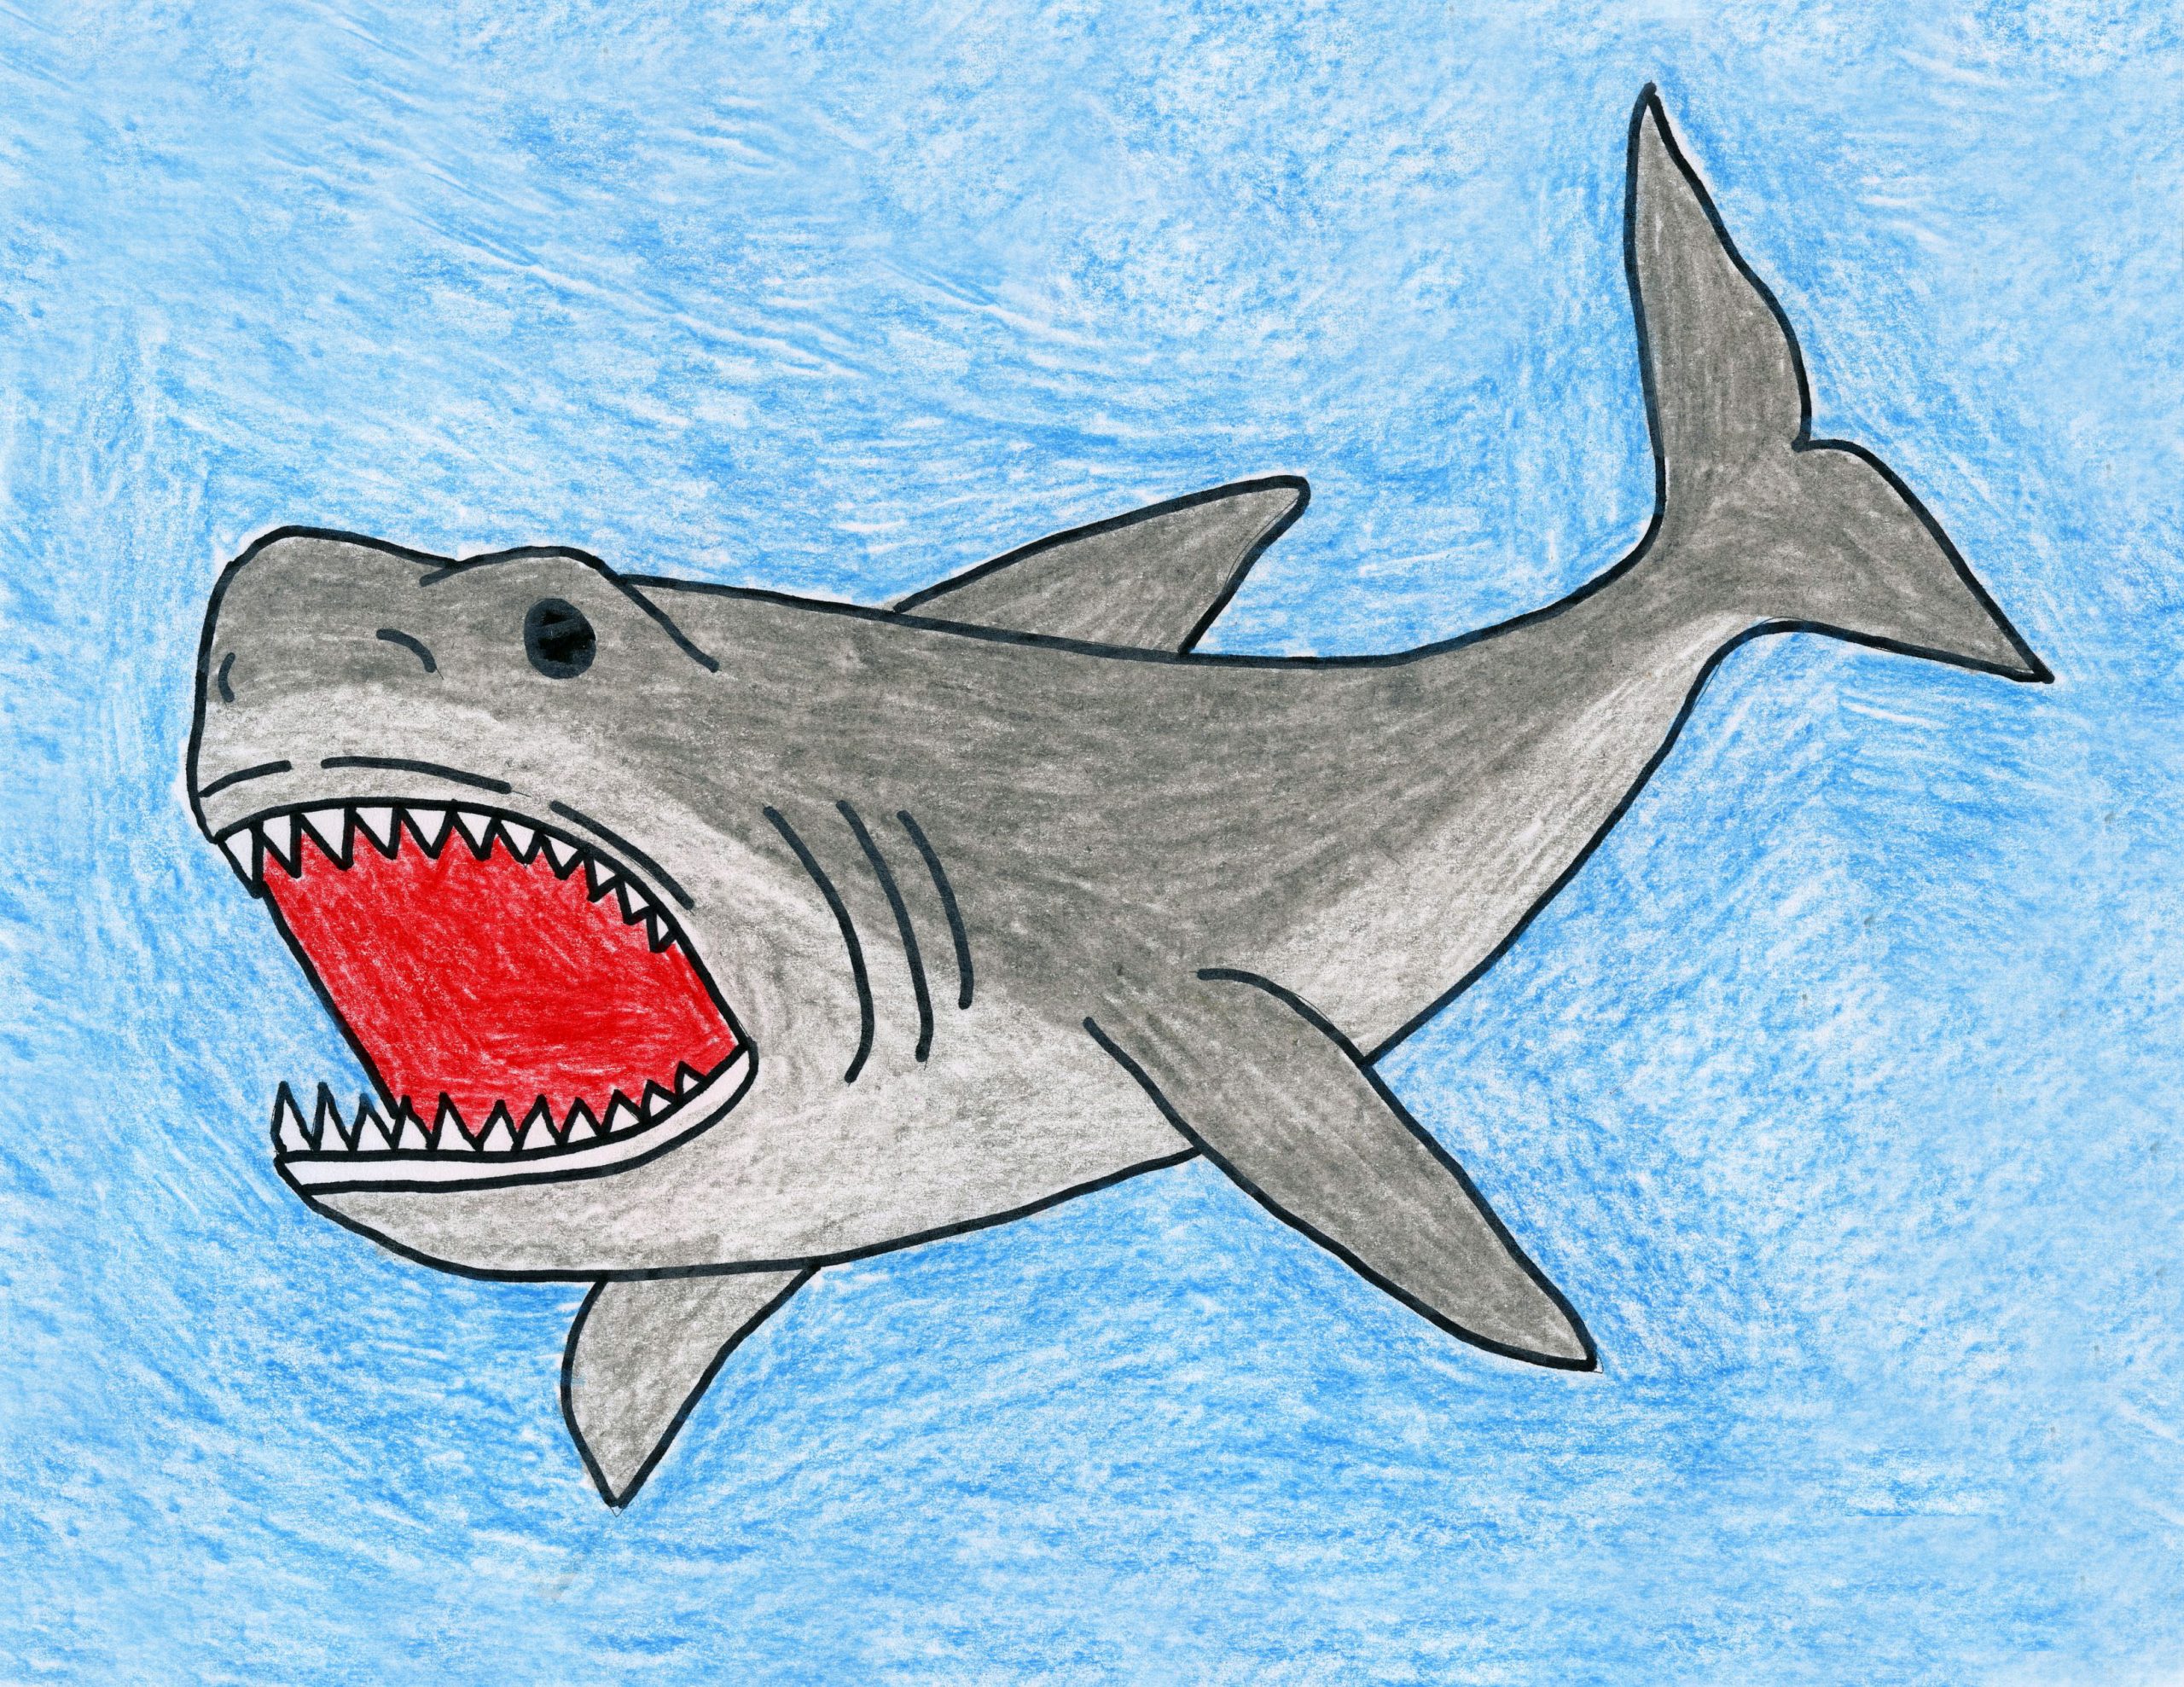 Top How To Draw Sharks For Kids of the decade Check it out now 